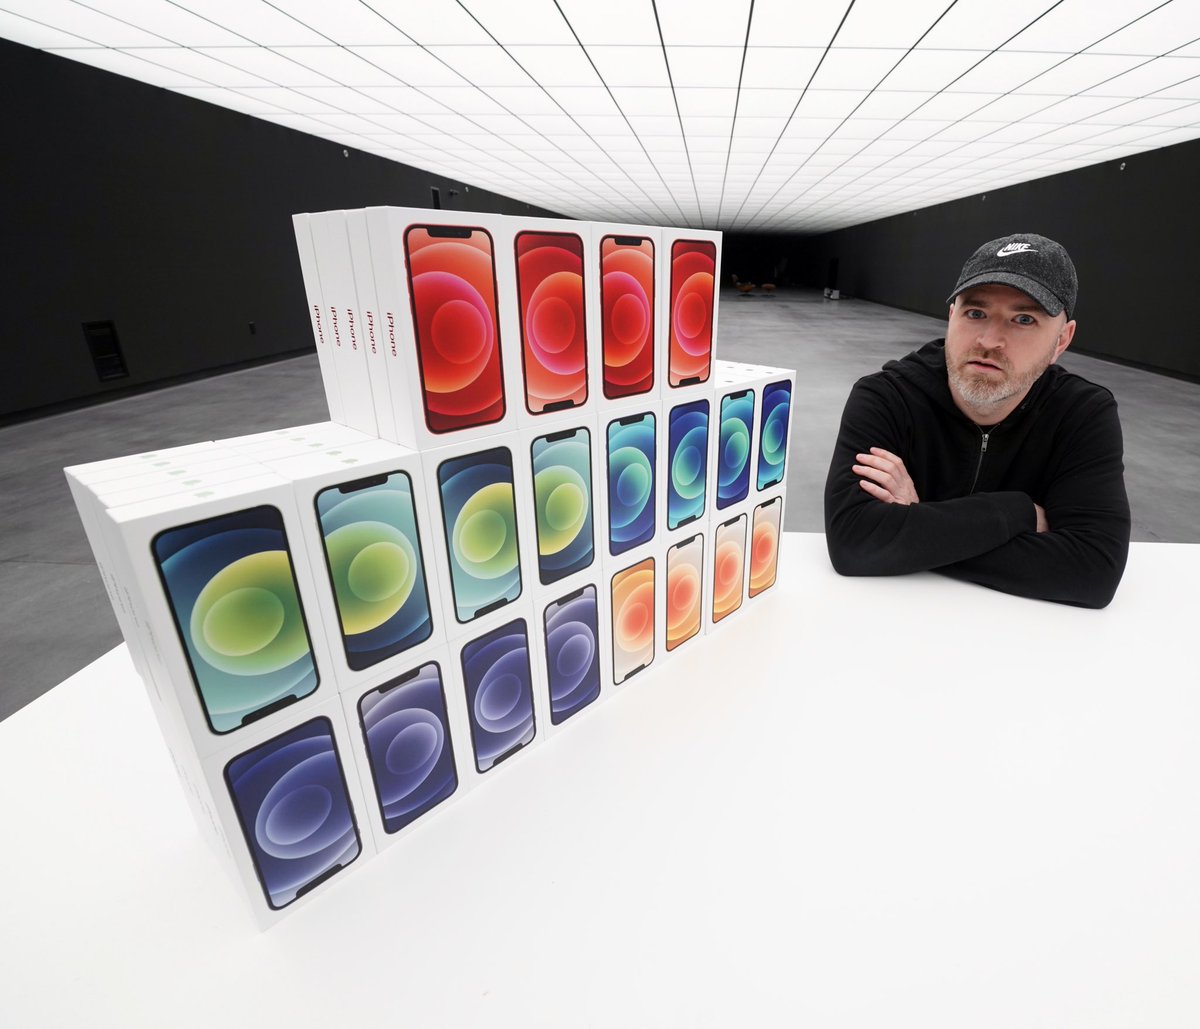 LIVE NOW 100 iPhone 12 Giveaway happening here - youtu.be/zhg7PUv9XlY #100FREEiPhone12 #UnboxTherapy